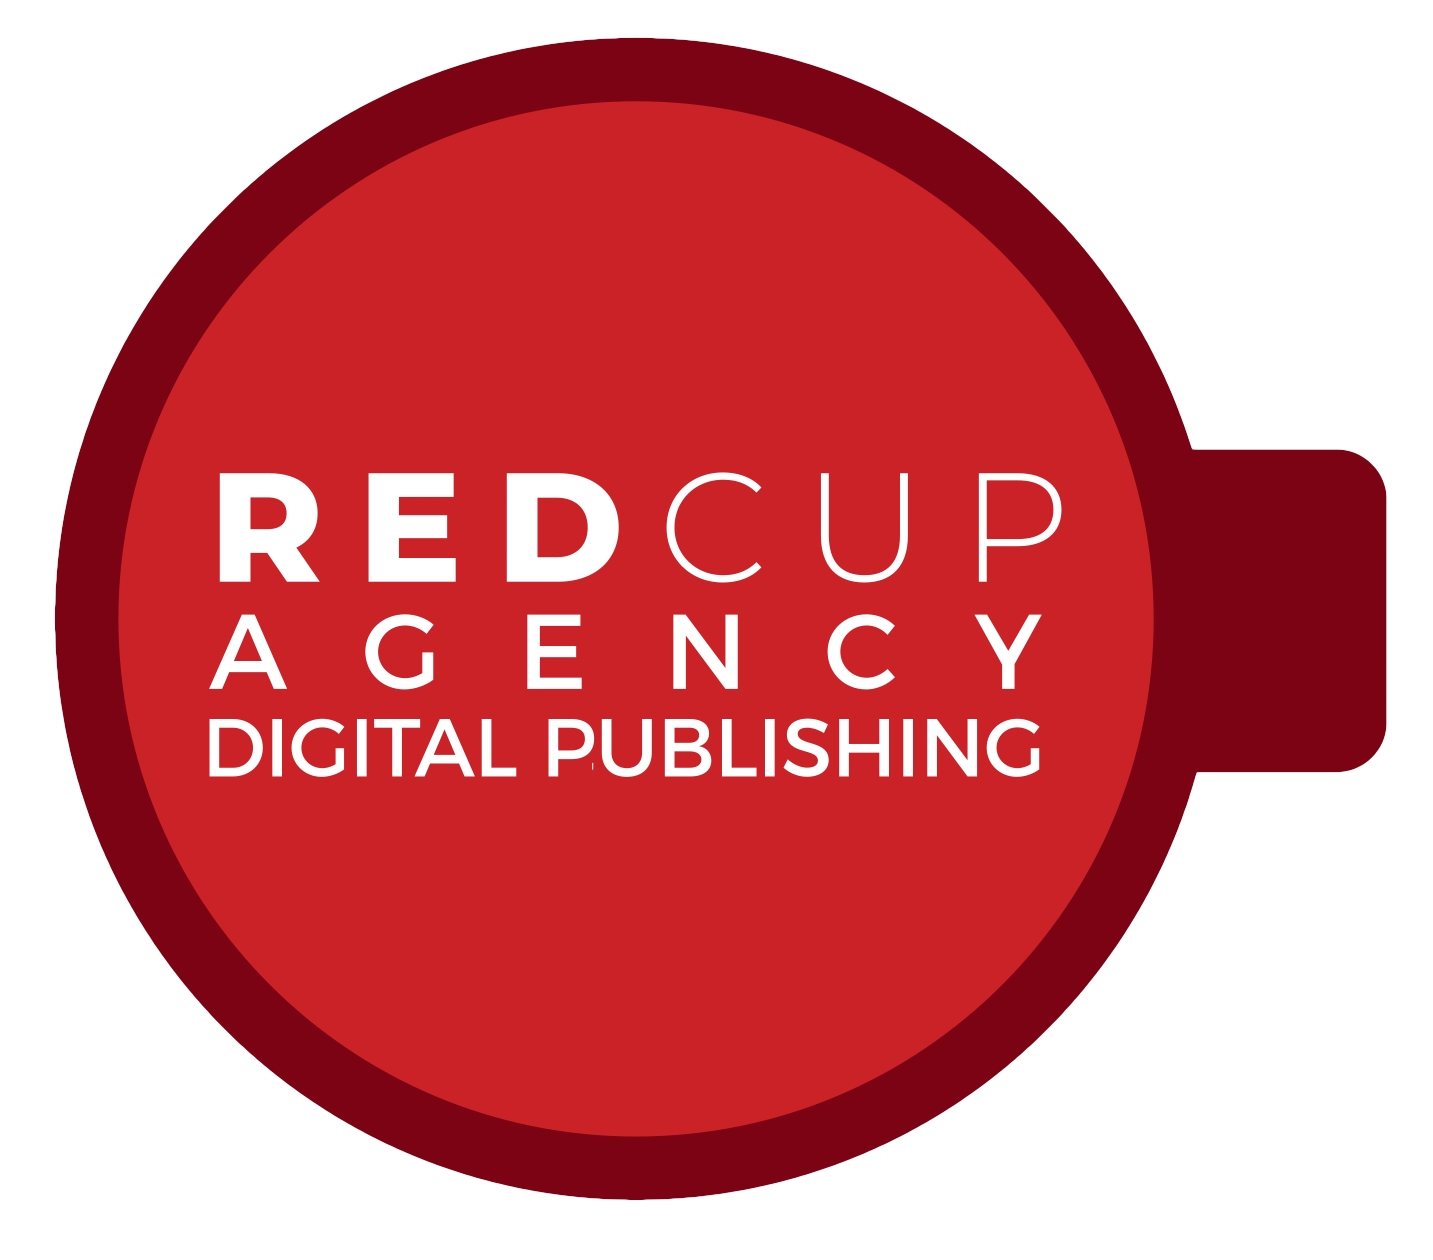 Red Cup Agency logo in a red circle